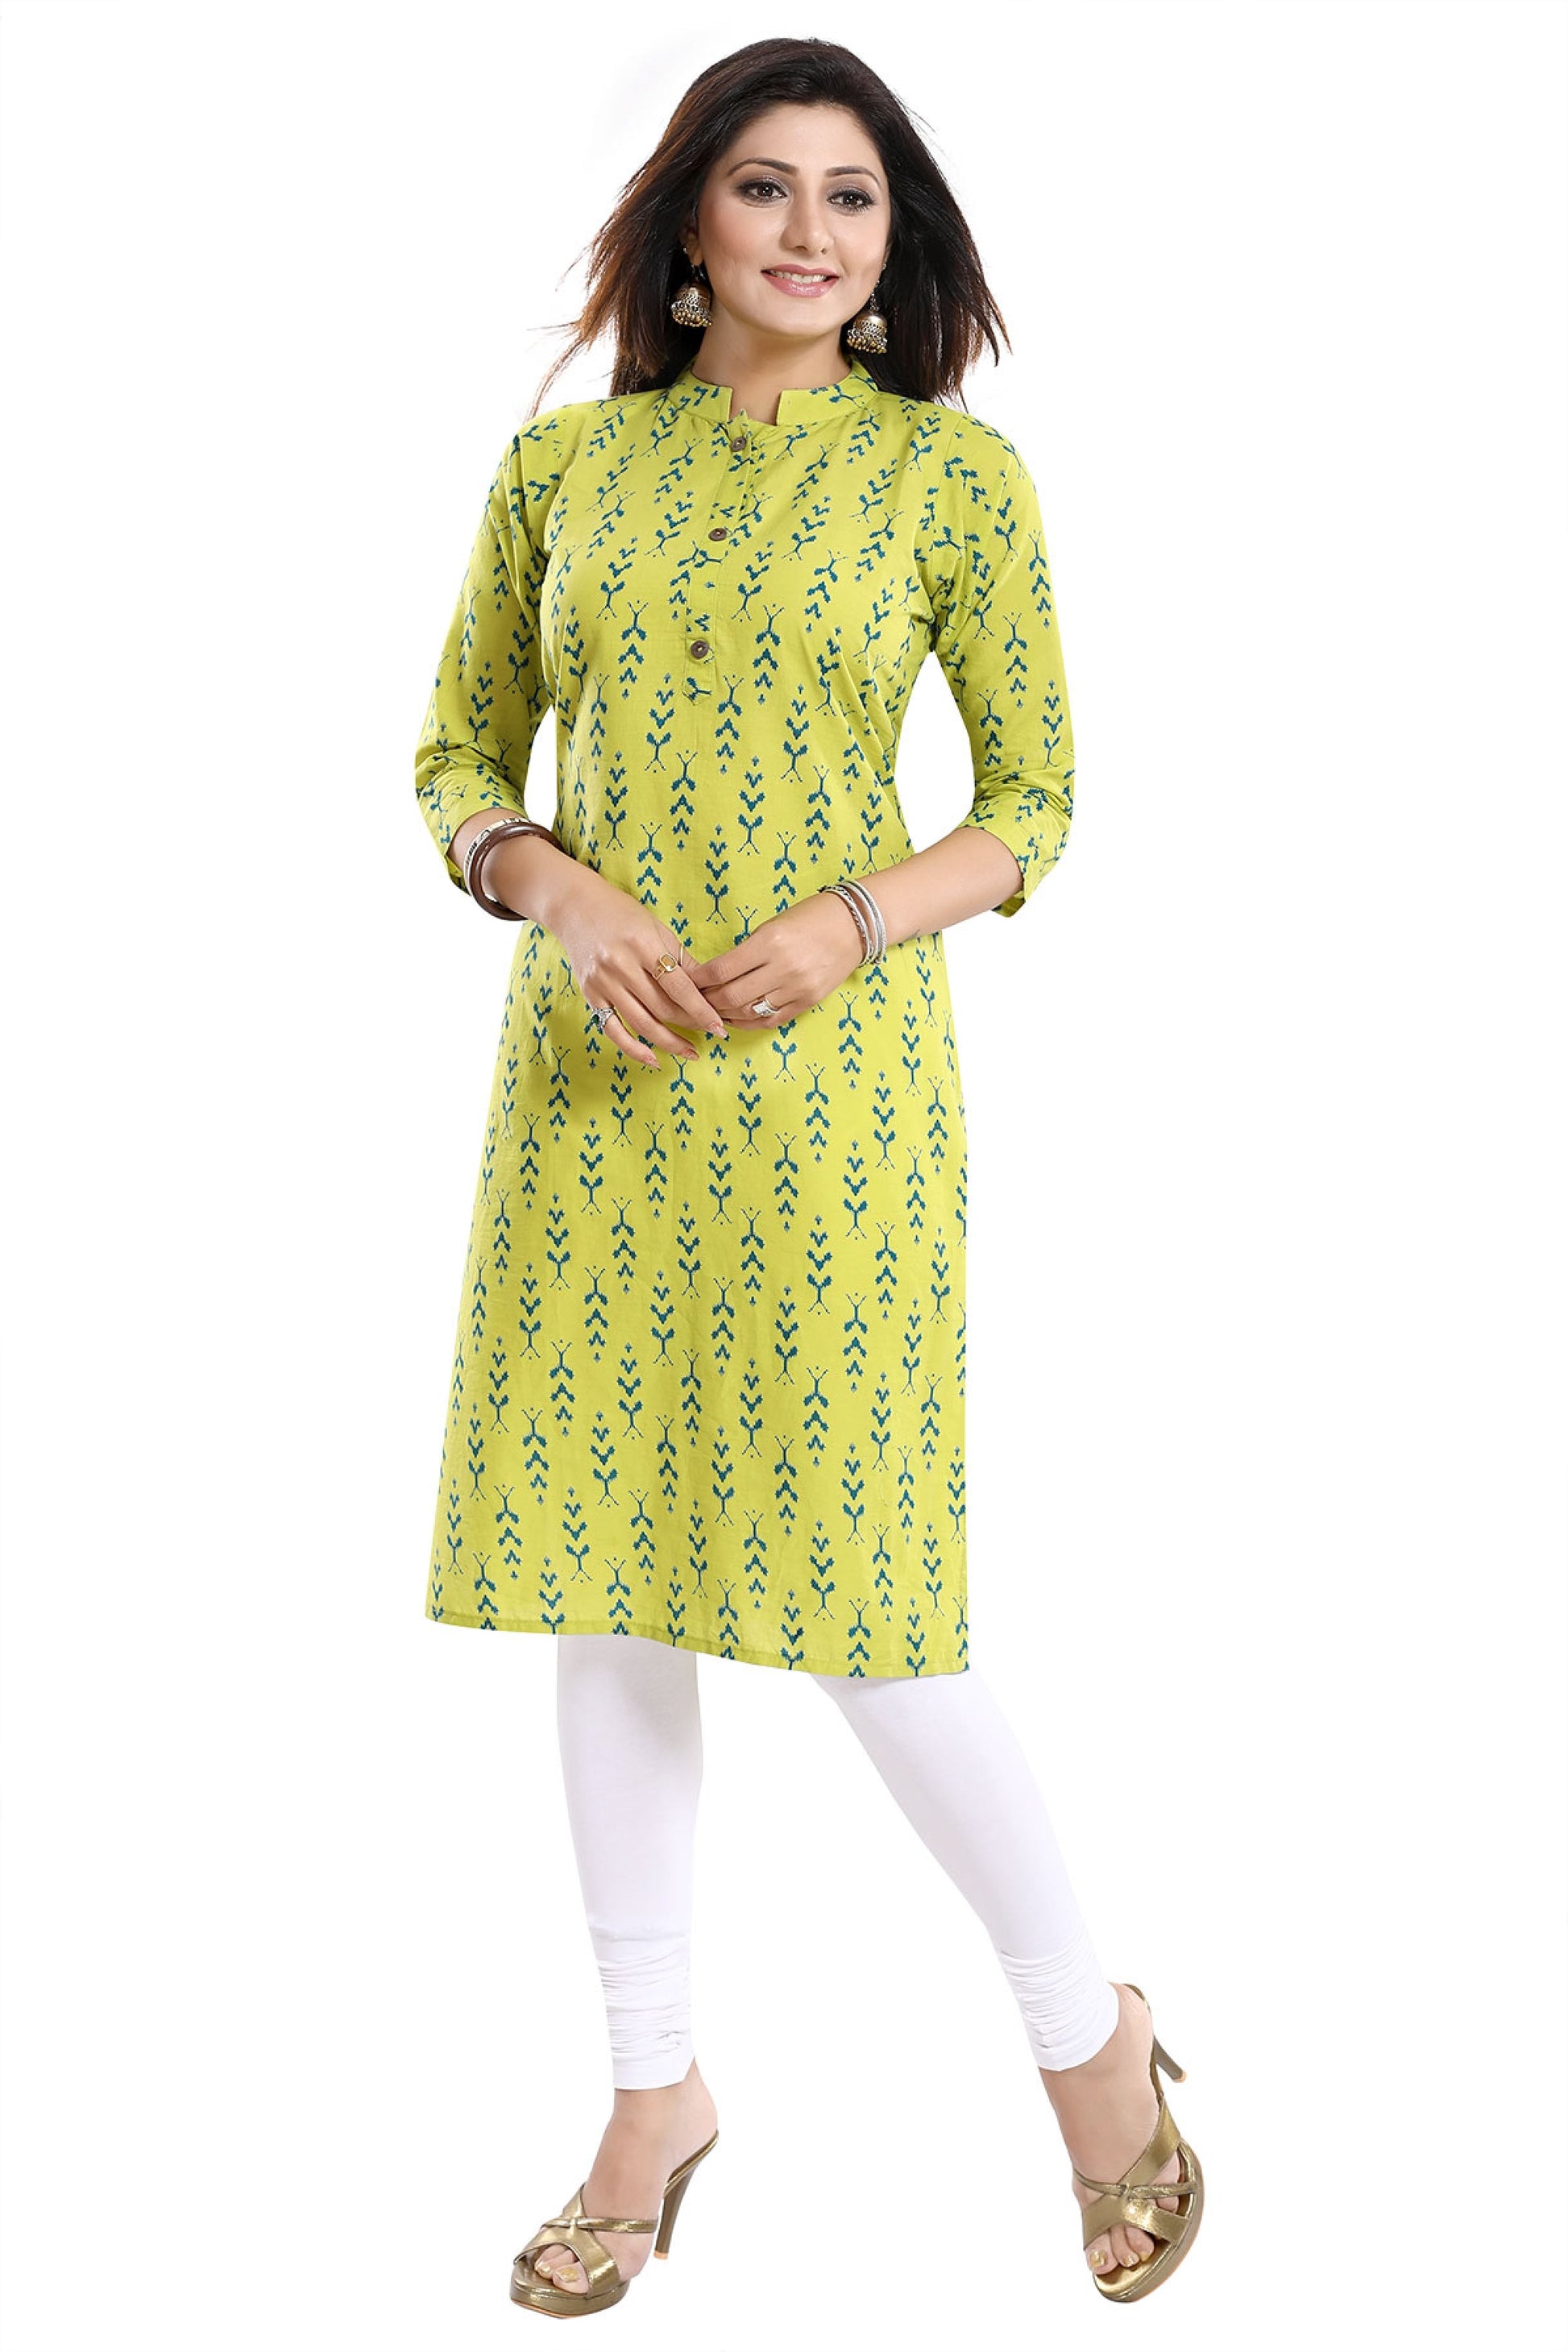 Lively Lime Green Cotton Printed Tunic With Ban Collar For Work Wear - keshubaba